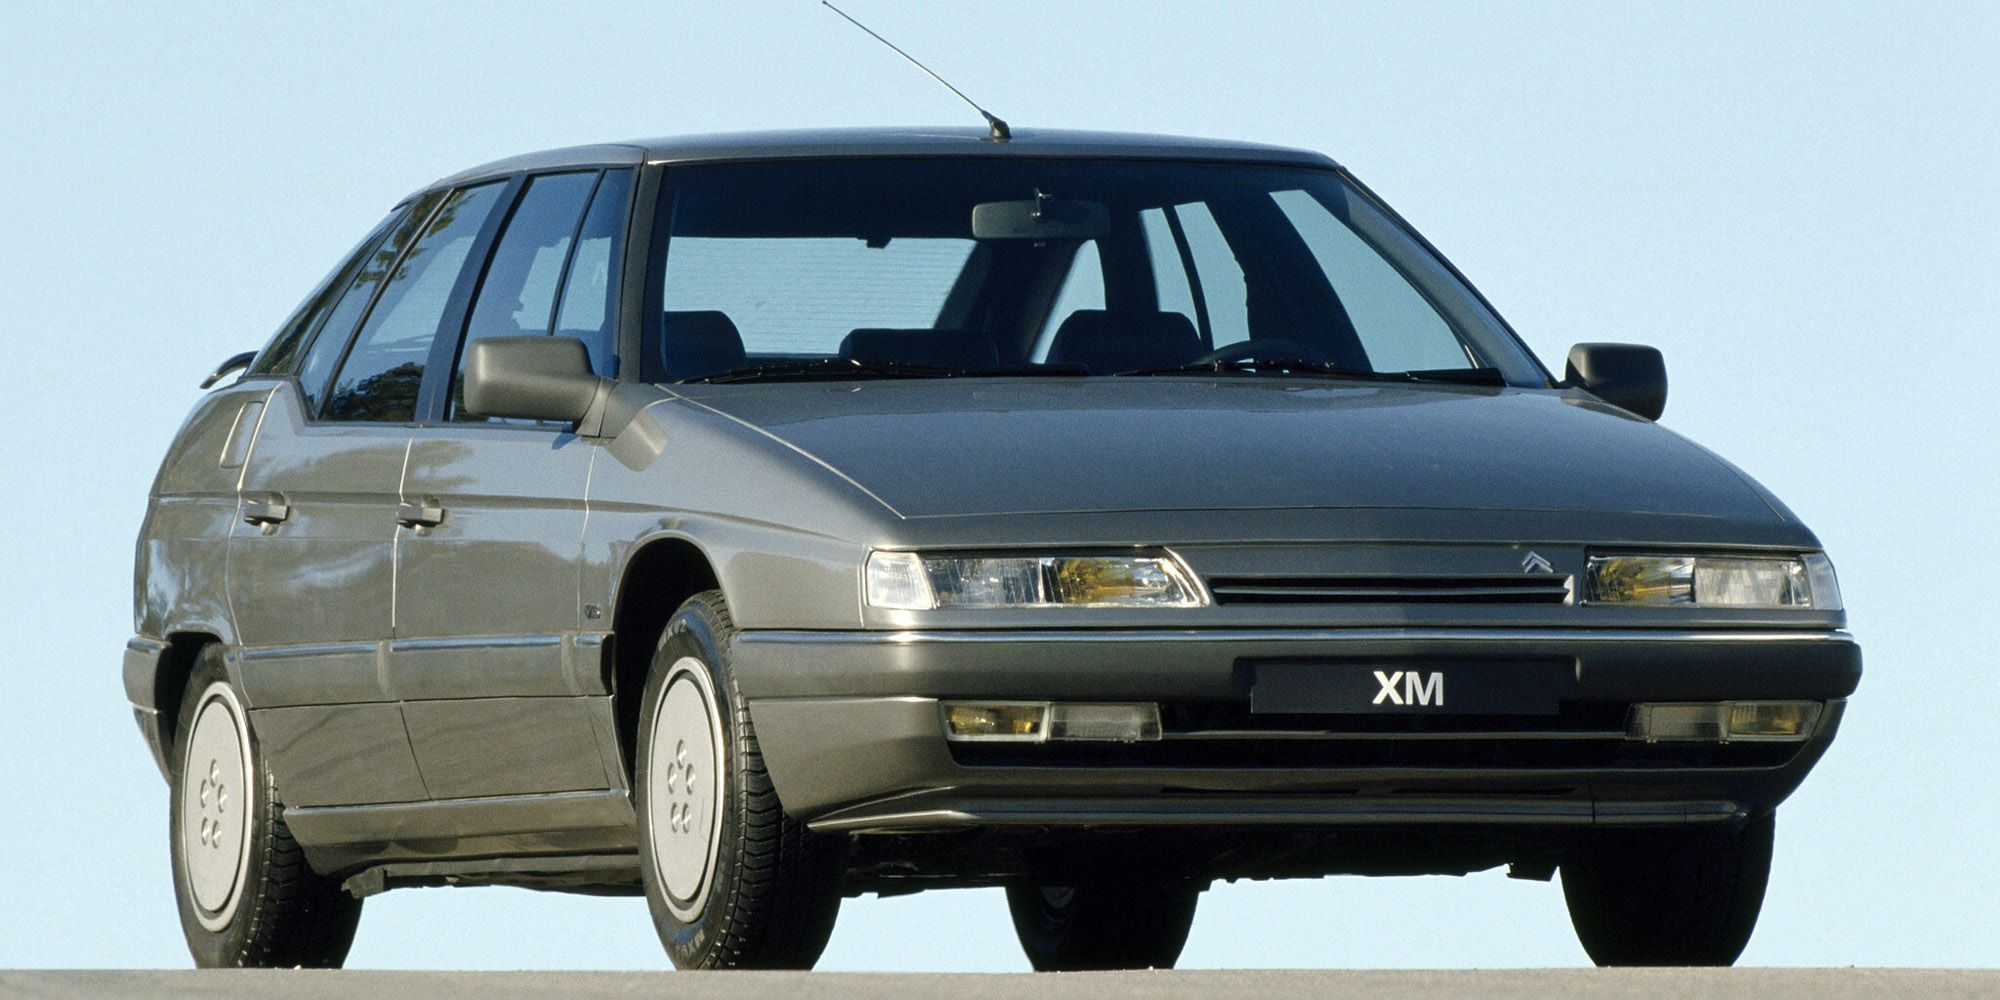 The front of the Citroen XM